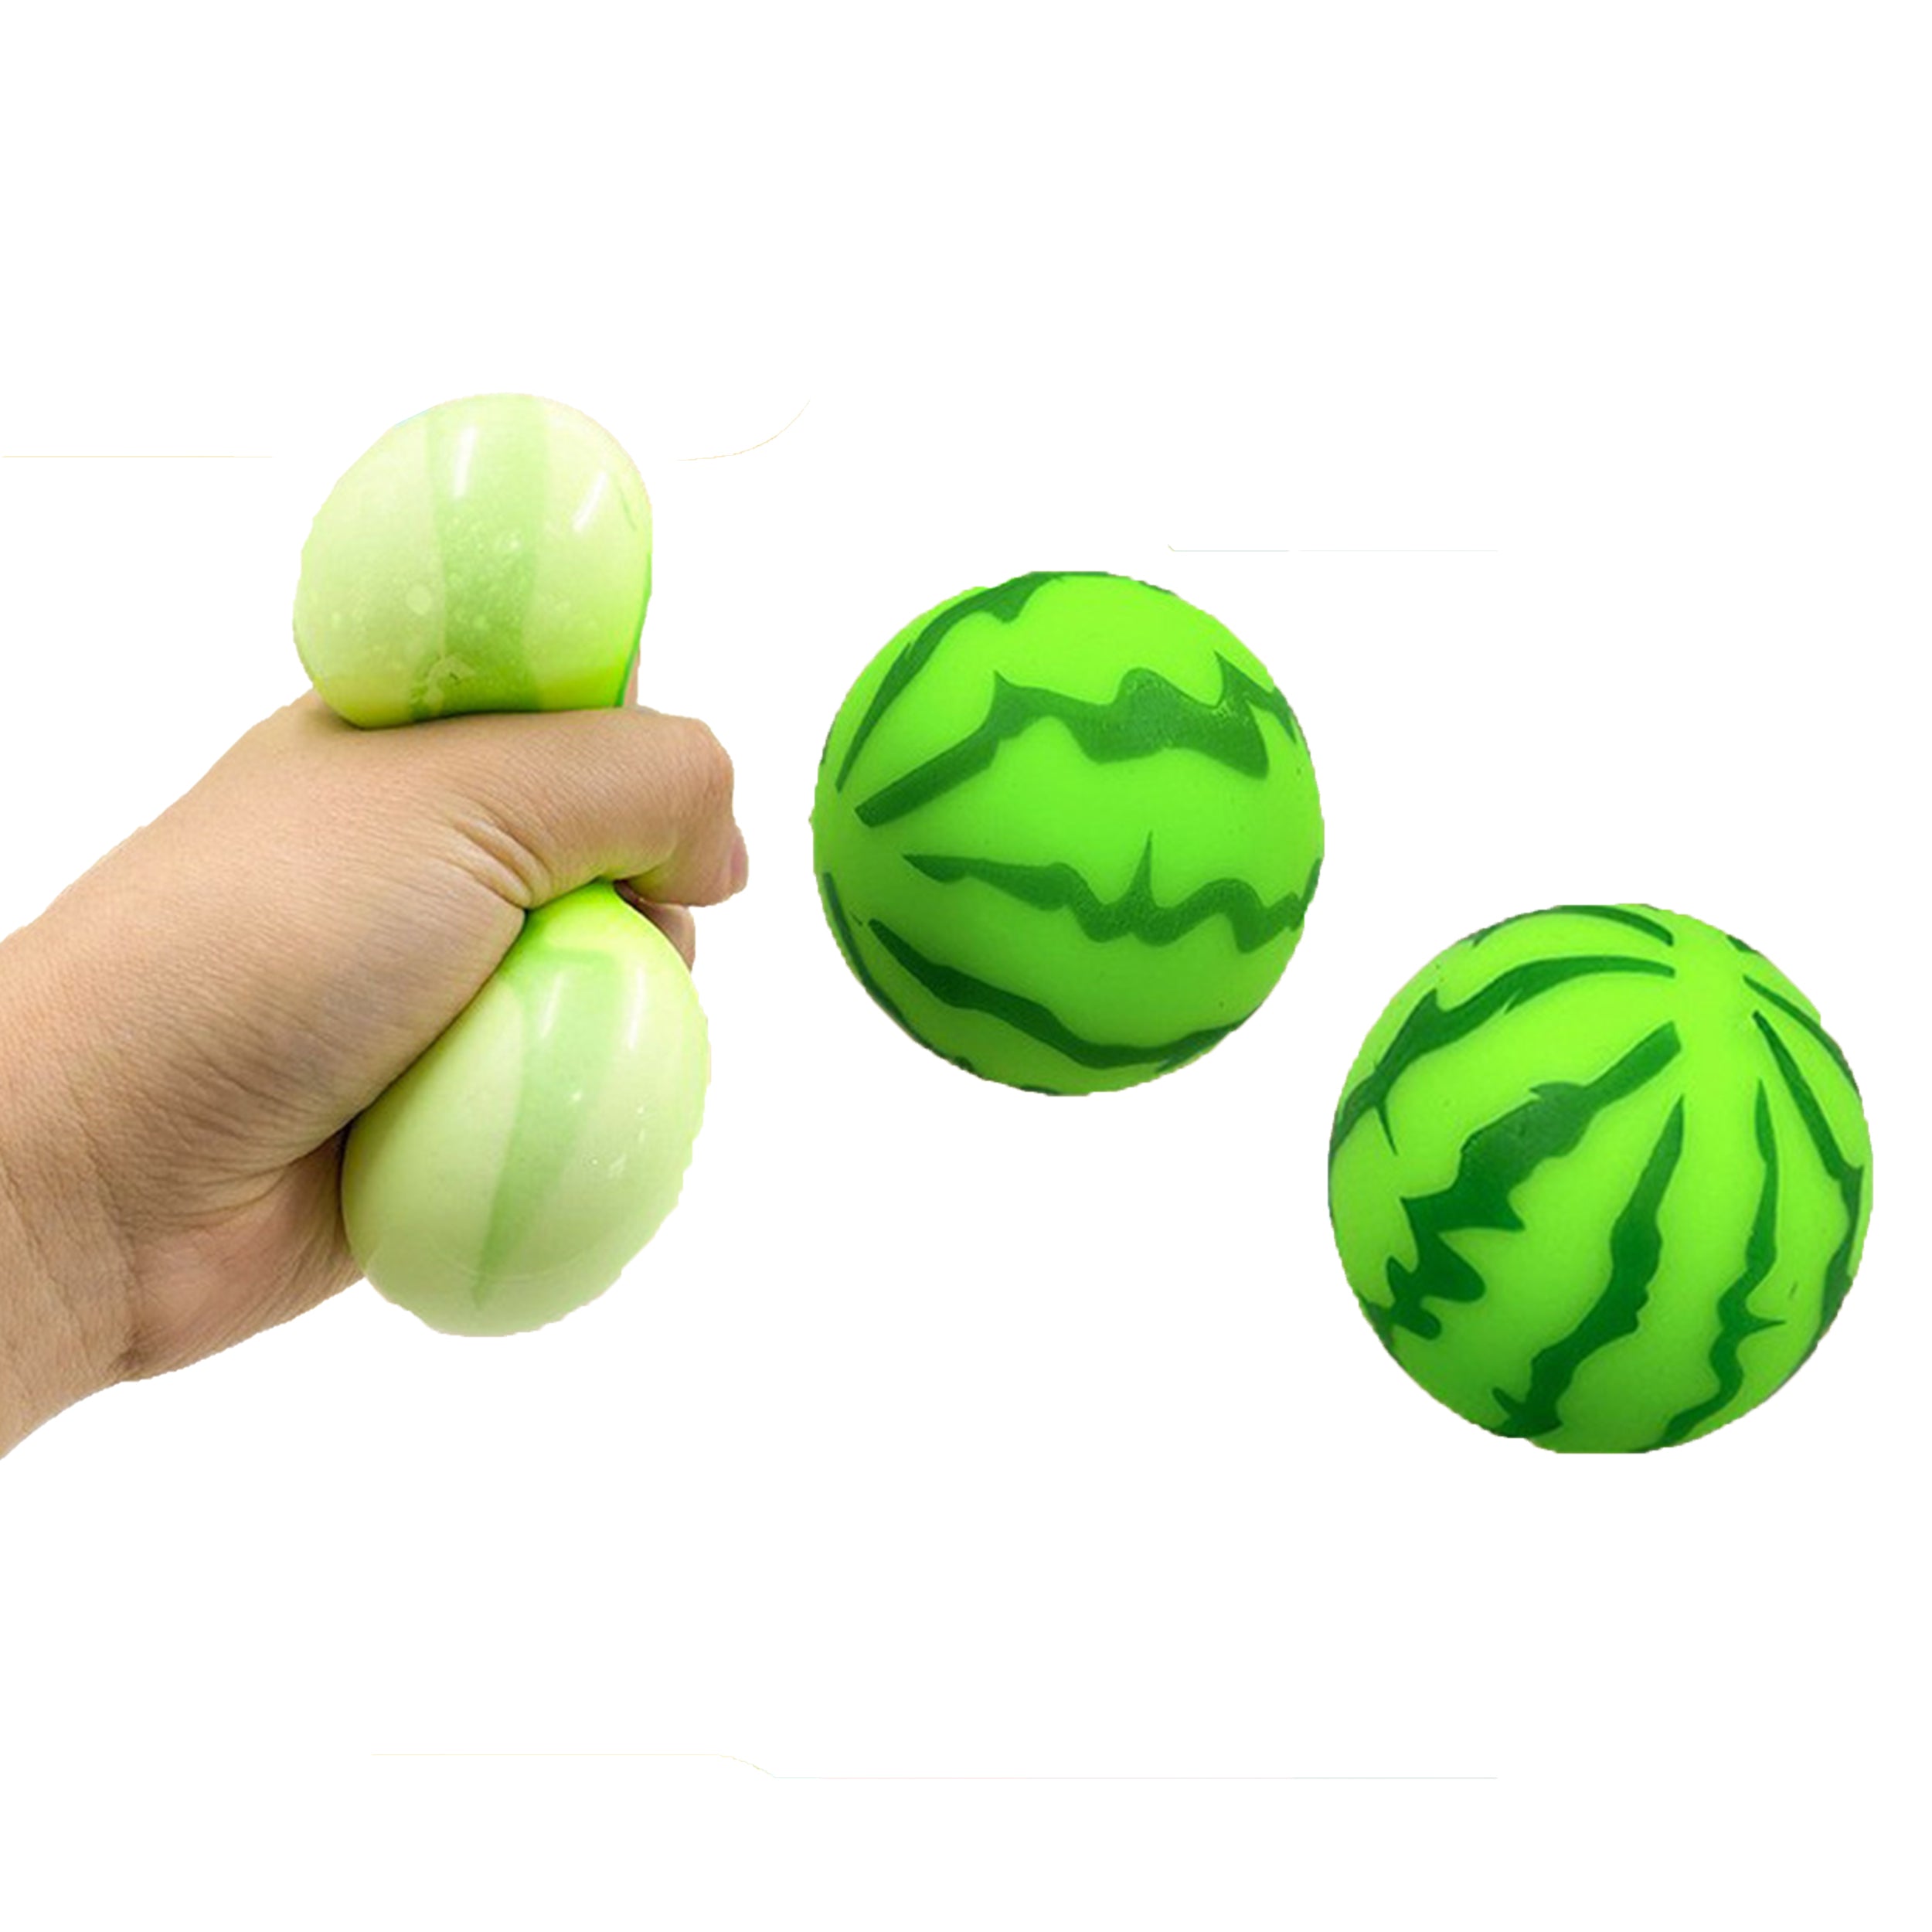 Shooting Squeeze Super Soft Toy Cute Animal Balls Popper Toy Stress Relief